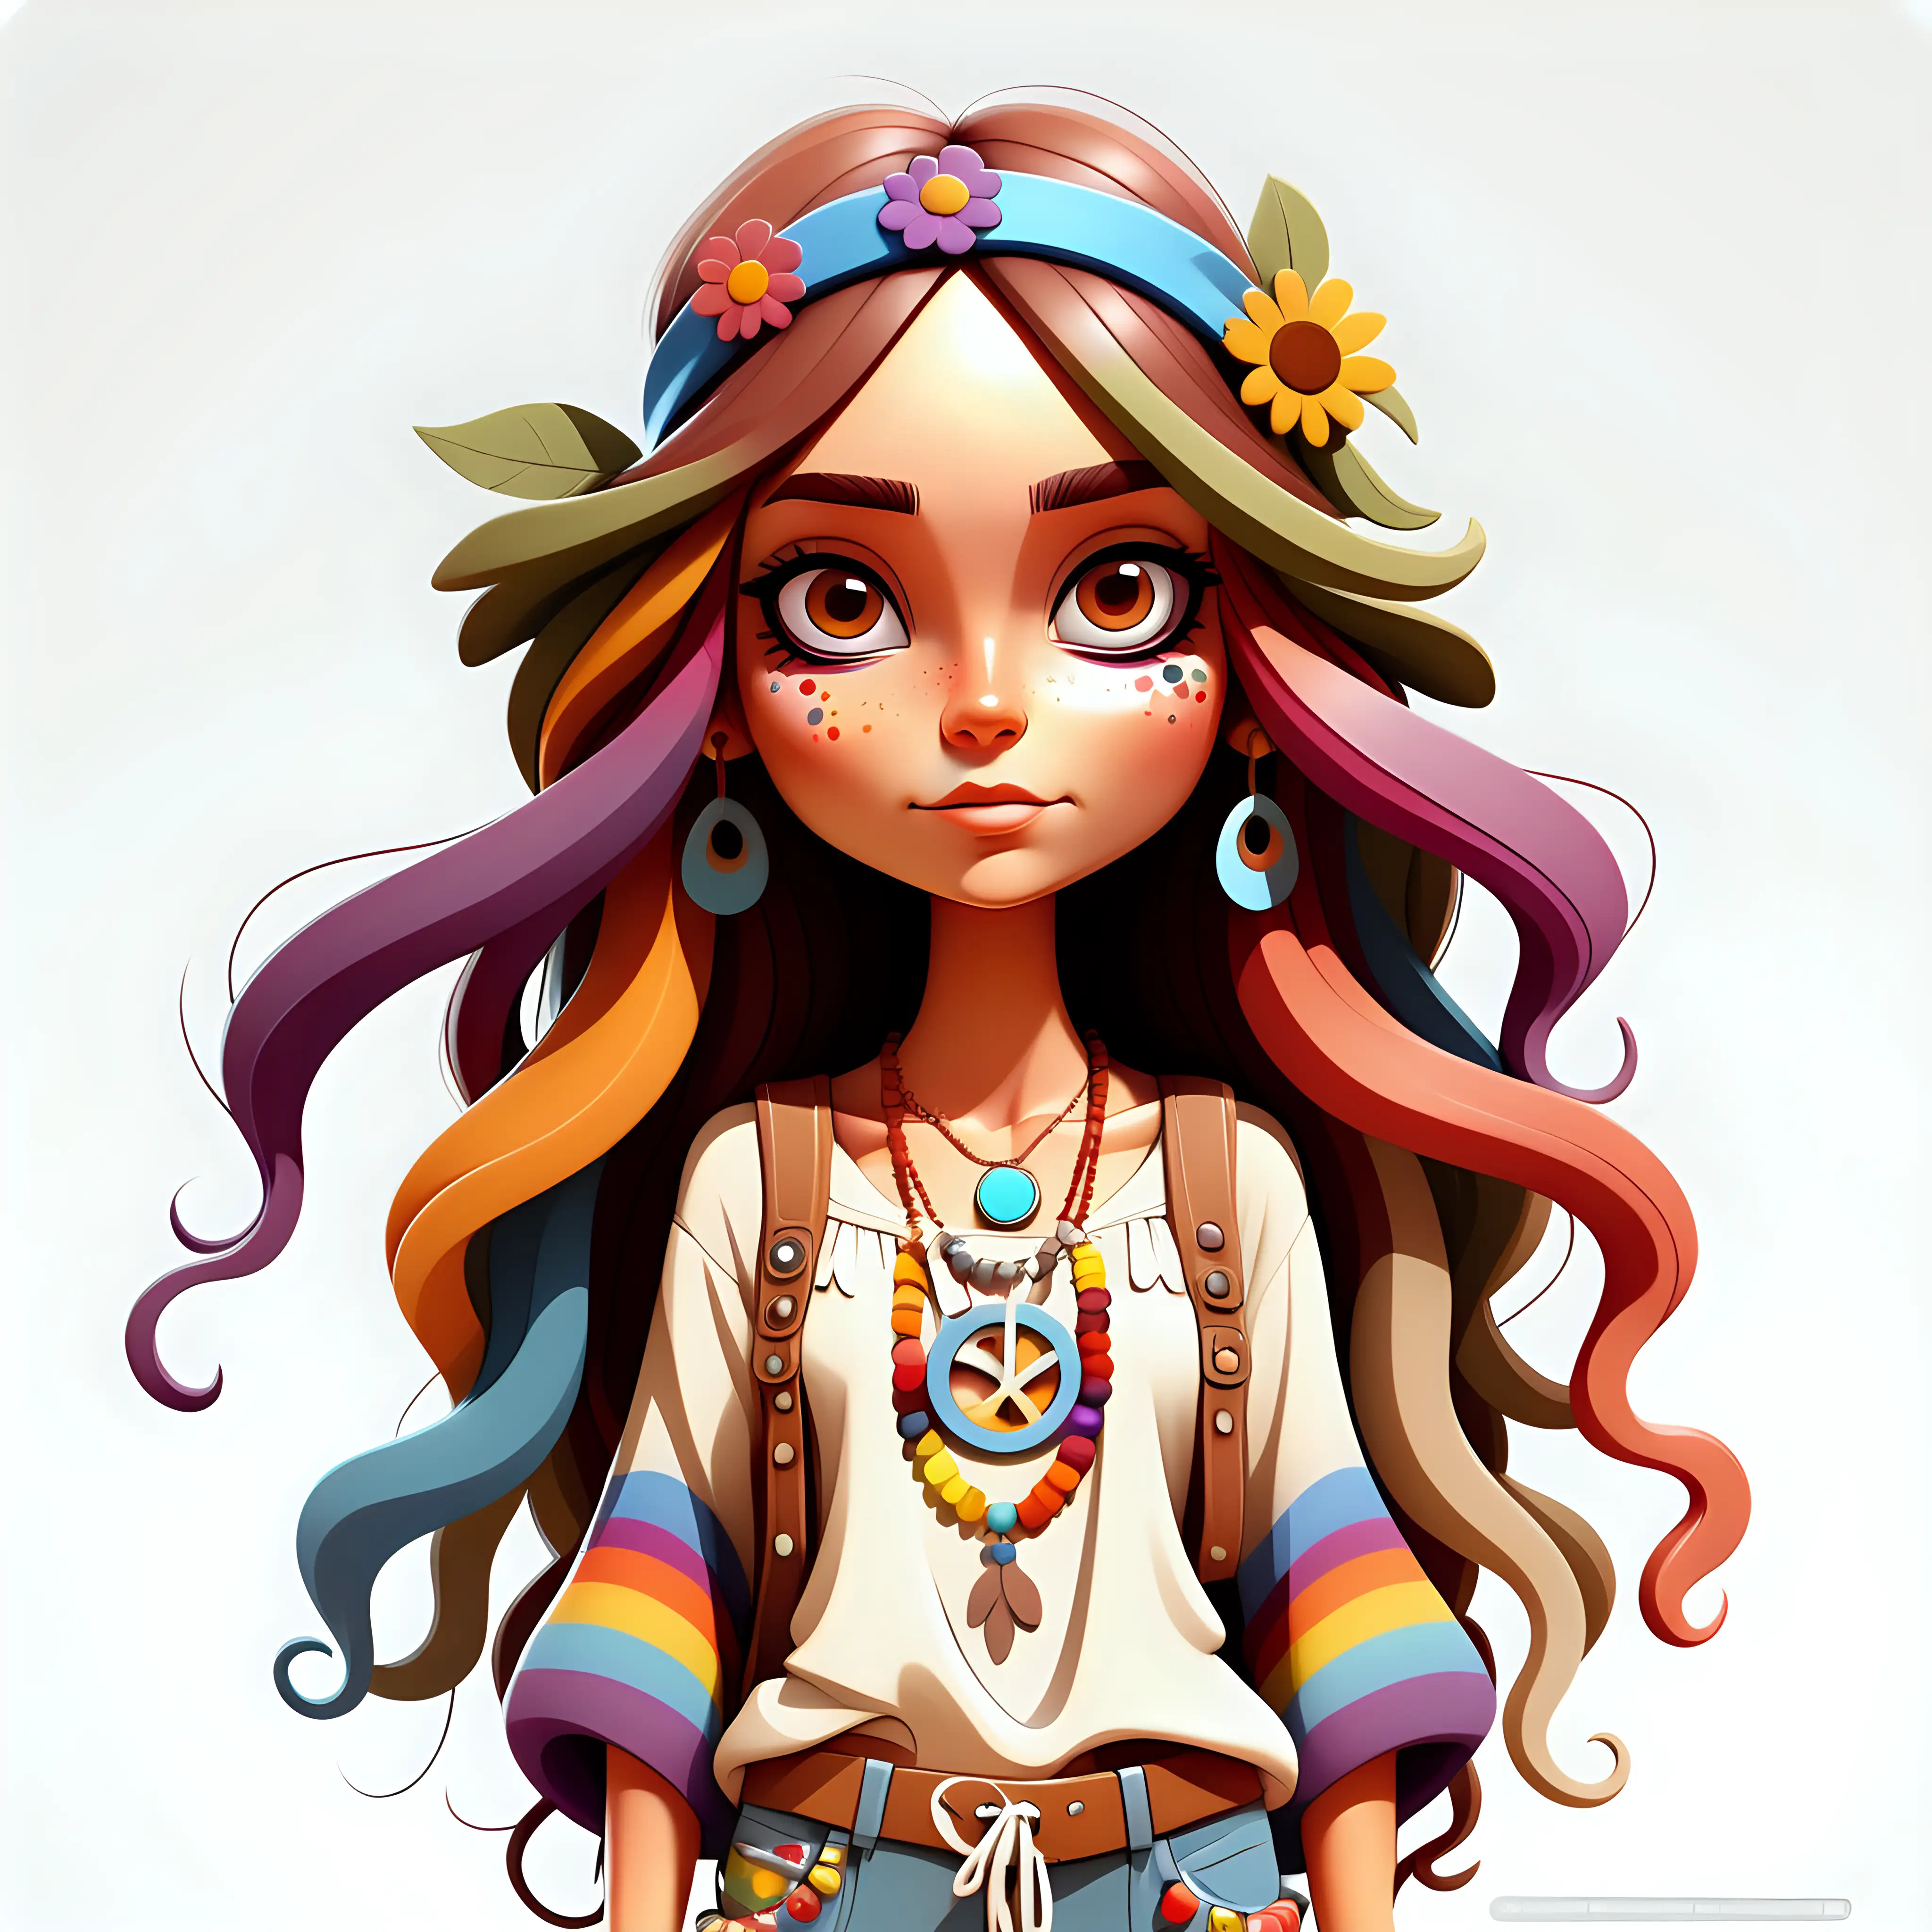 Vibrant Cartoon Illustration of a FreeSpirited Girl in Full Hippie Attire on a White Background